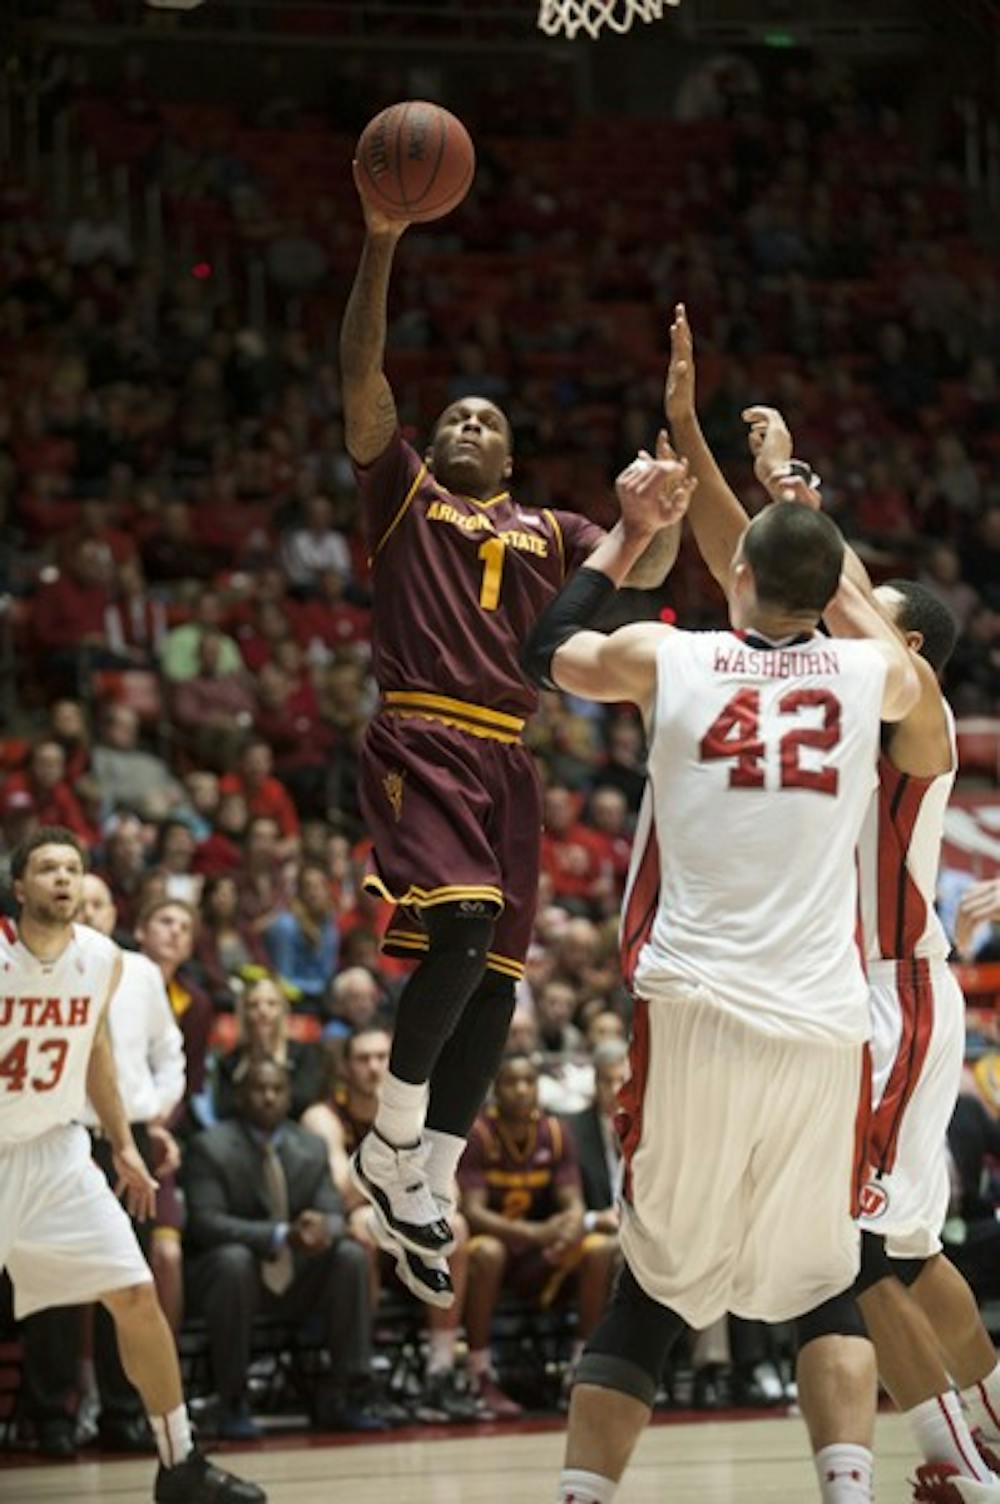 Redshirt freshman Jahii Carson lets go of a floater against Utah on Feb. 13. The ASU basketball team's loss to the Utes hurts the team's chances of getting into the tournament. (Photo Courtesy of The Daily Utah Chronicle)